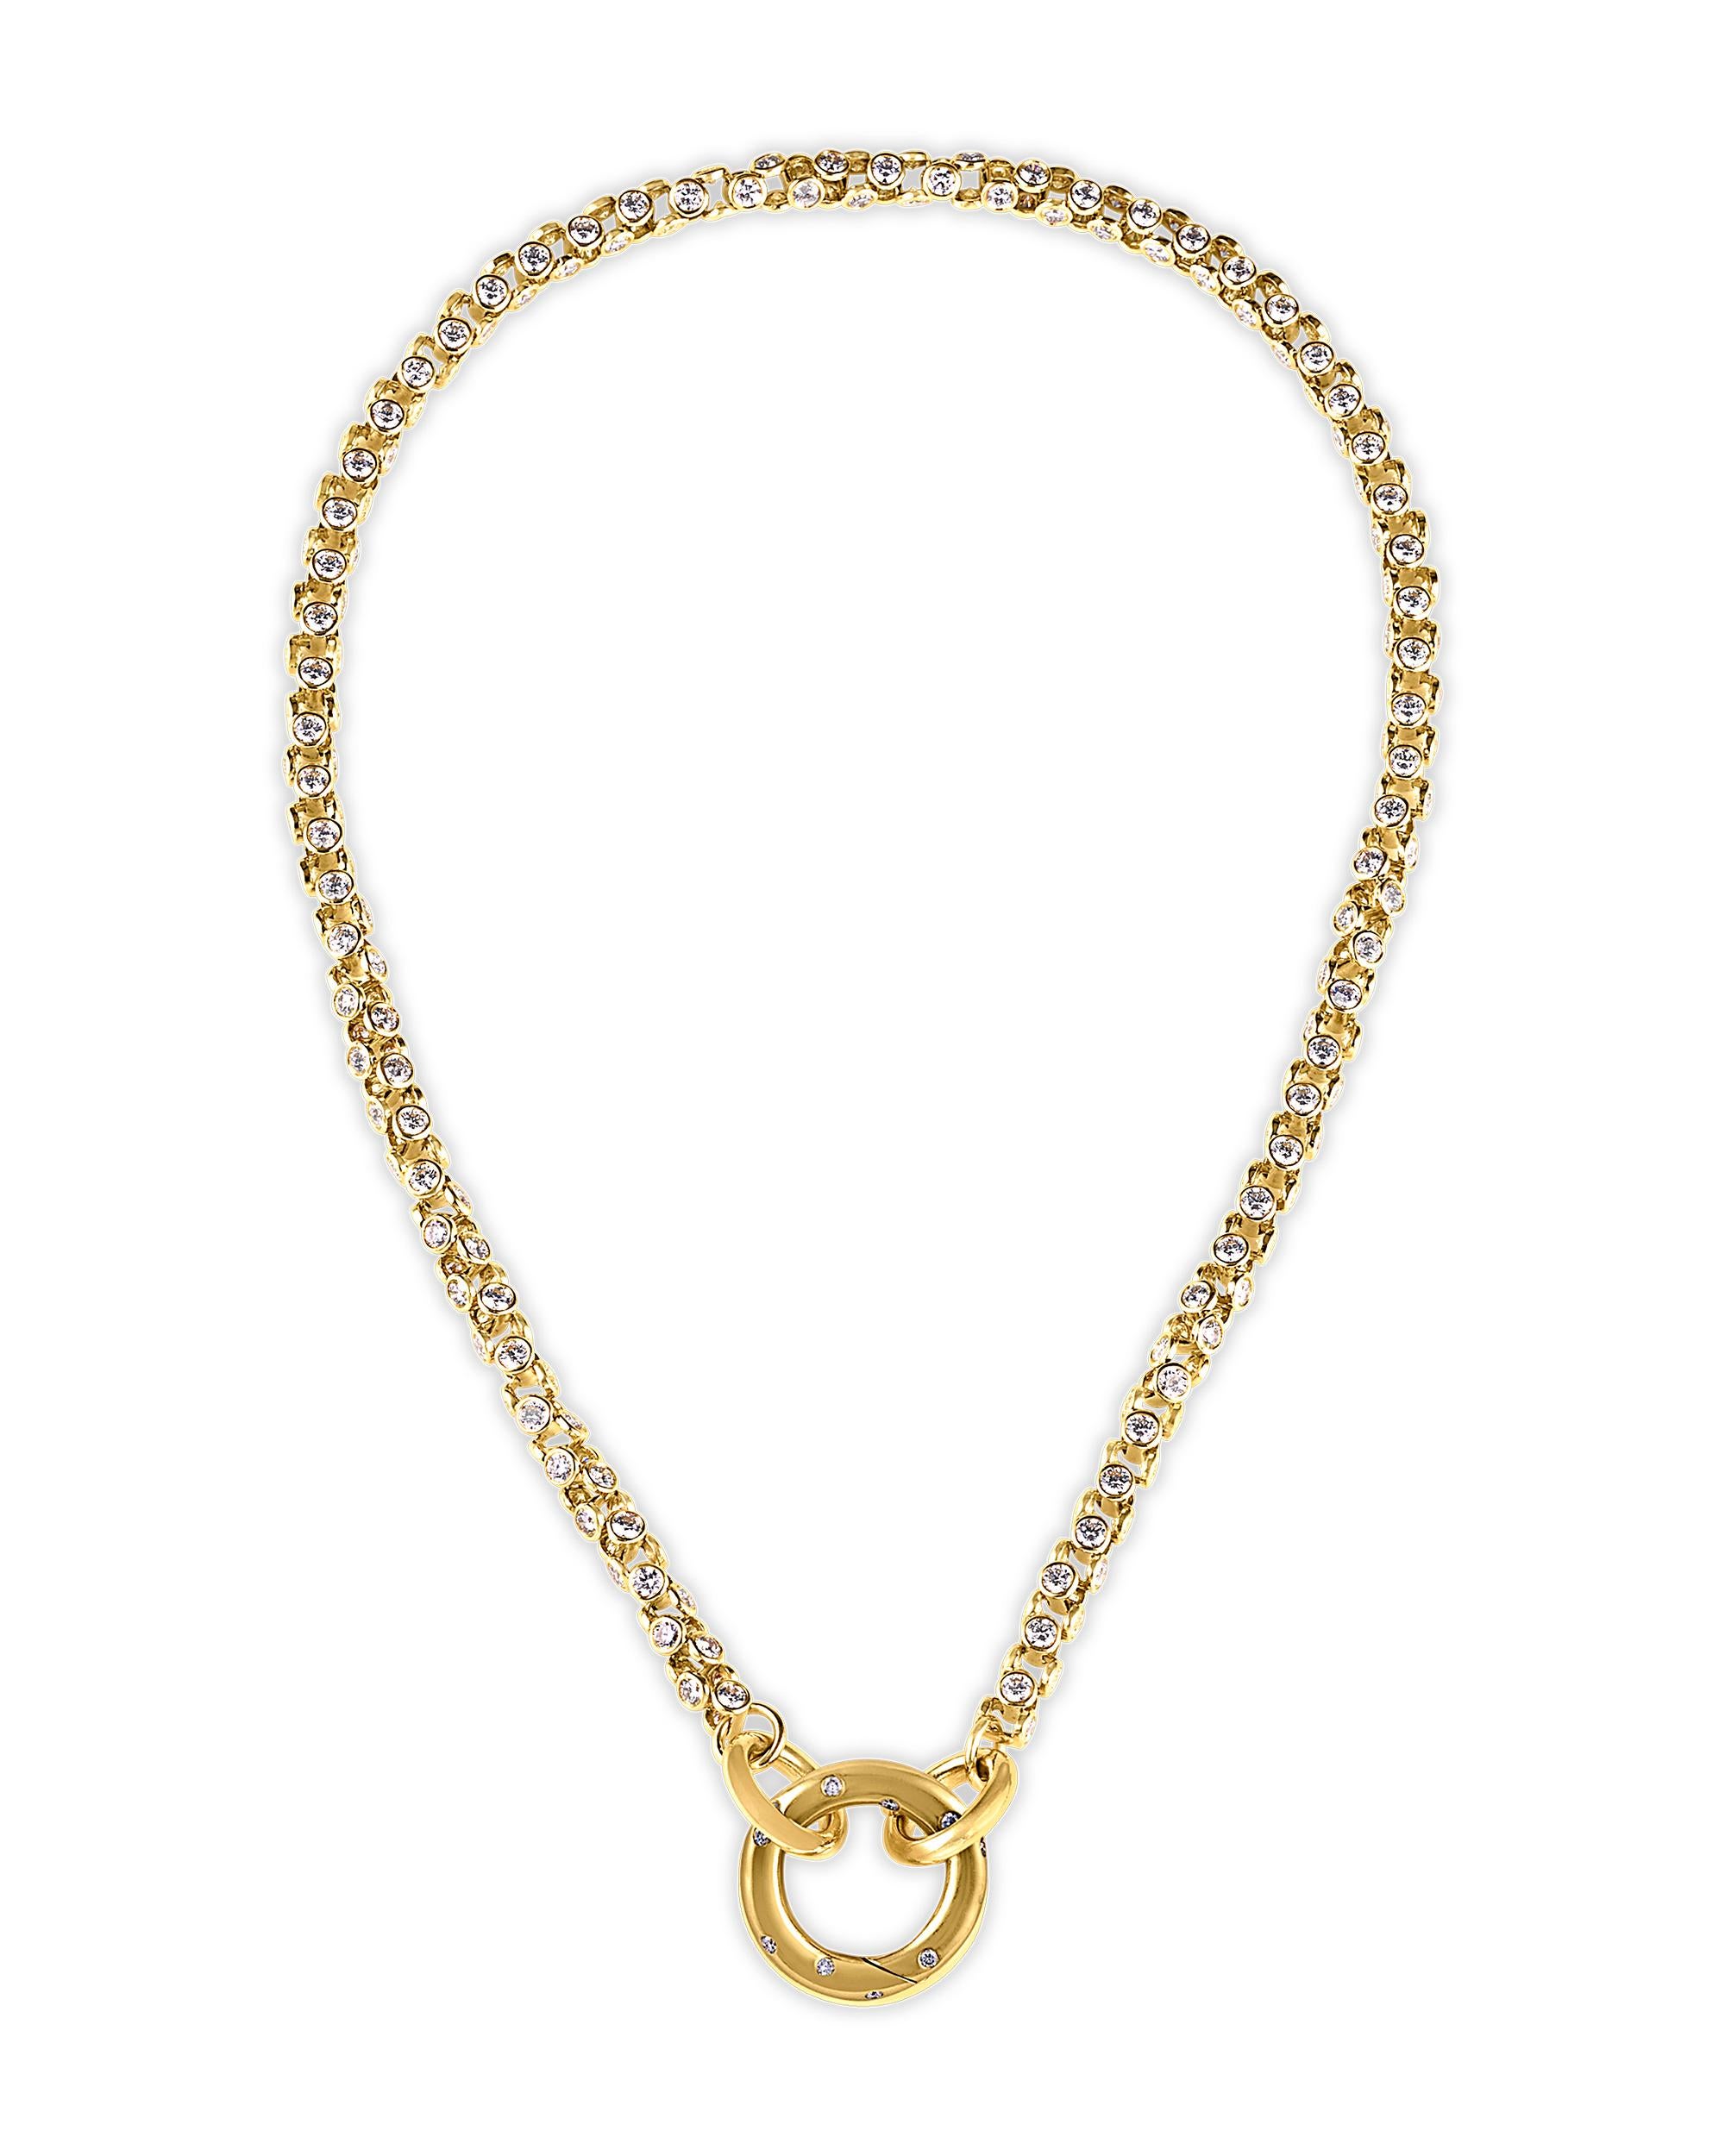 Bold 18K yellow gold links and 304 white diamonds totaling 15.99 carats comprise this classic chain necklace by Oscar Heyman. Each link is joined by a bezel set round diamond accent, adding sparkle to the modern design. Masterfully crafted, this